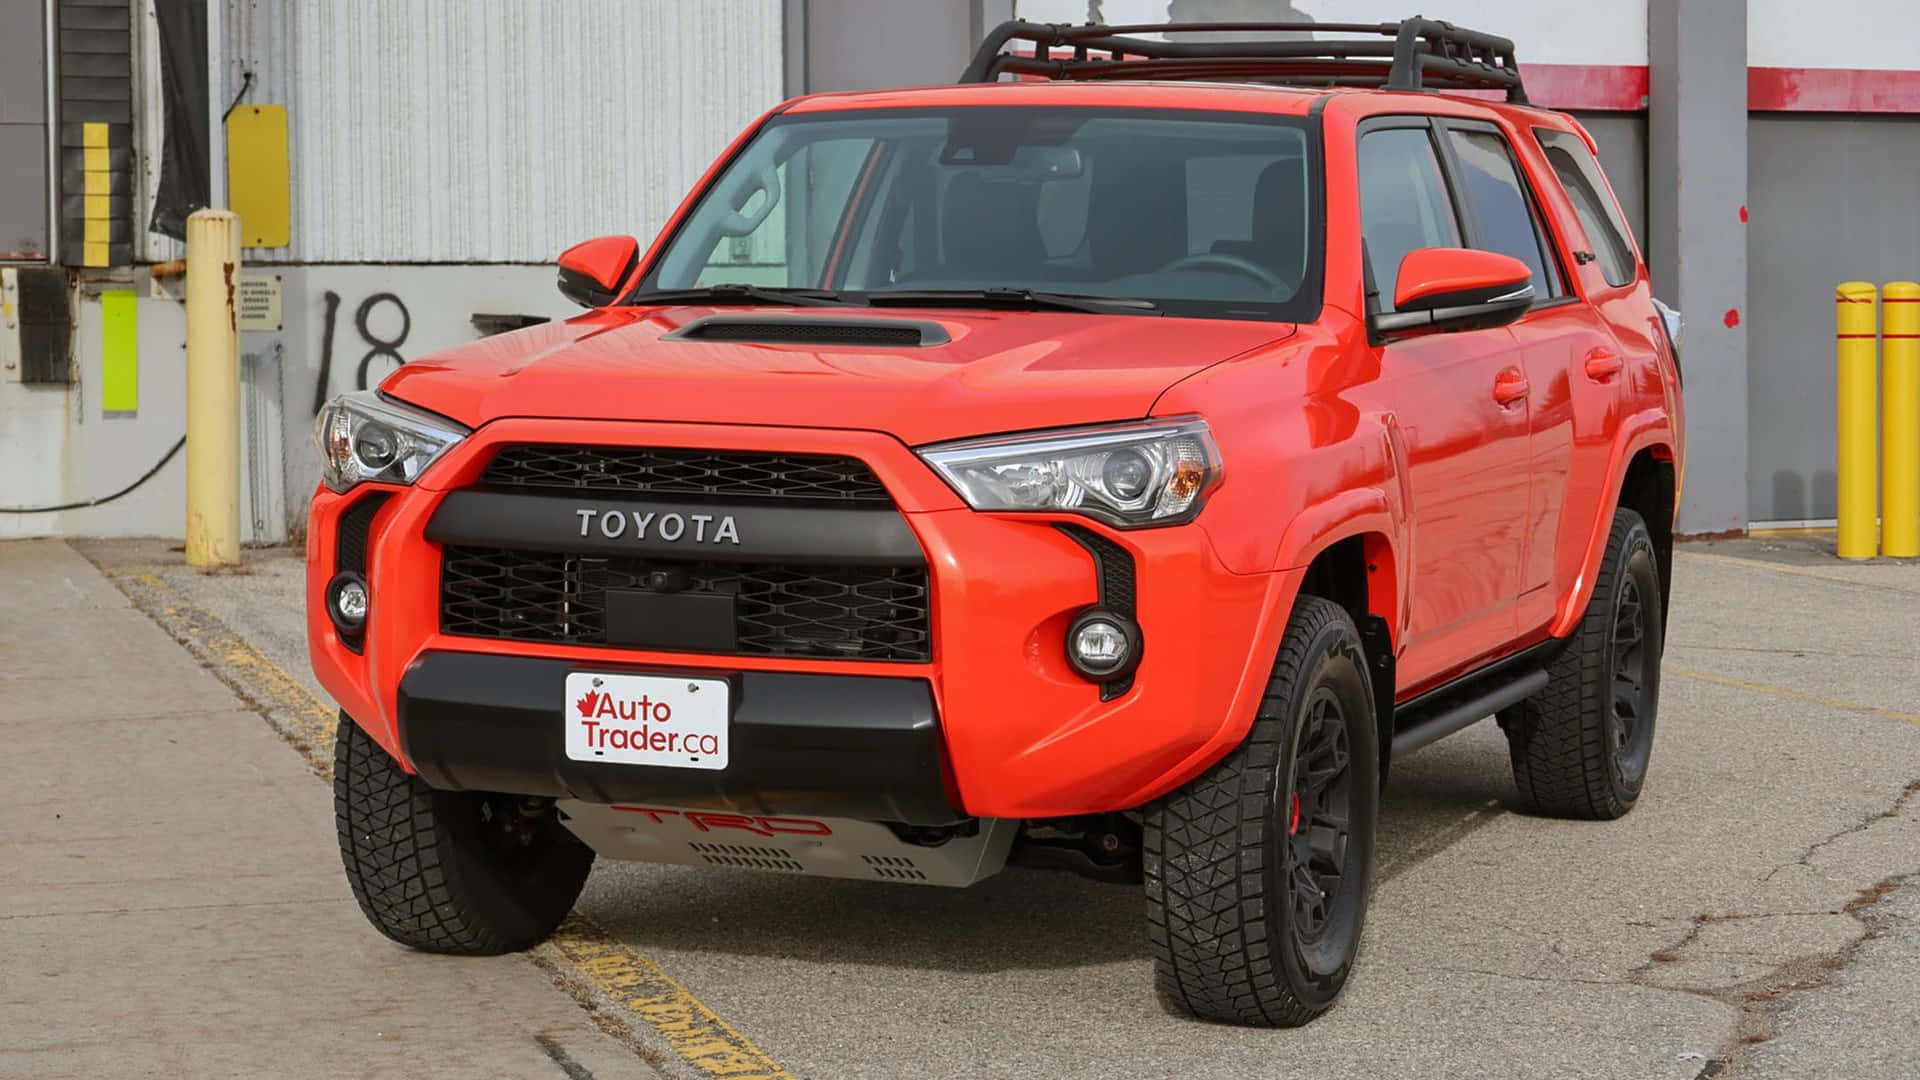 Toyota 4Runner: Bringing Innovation, Refinement&Style to the Road in 2023